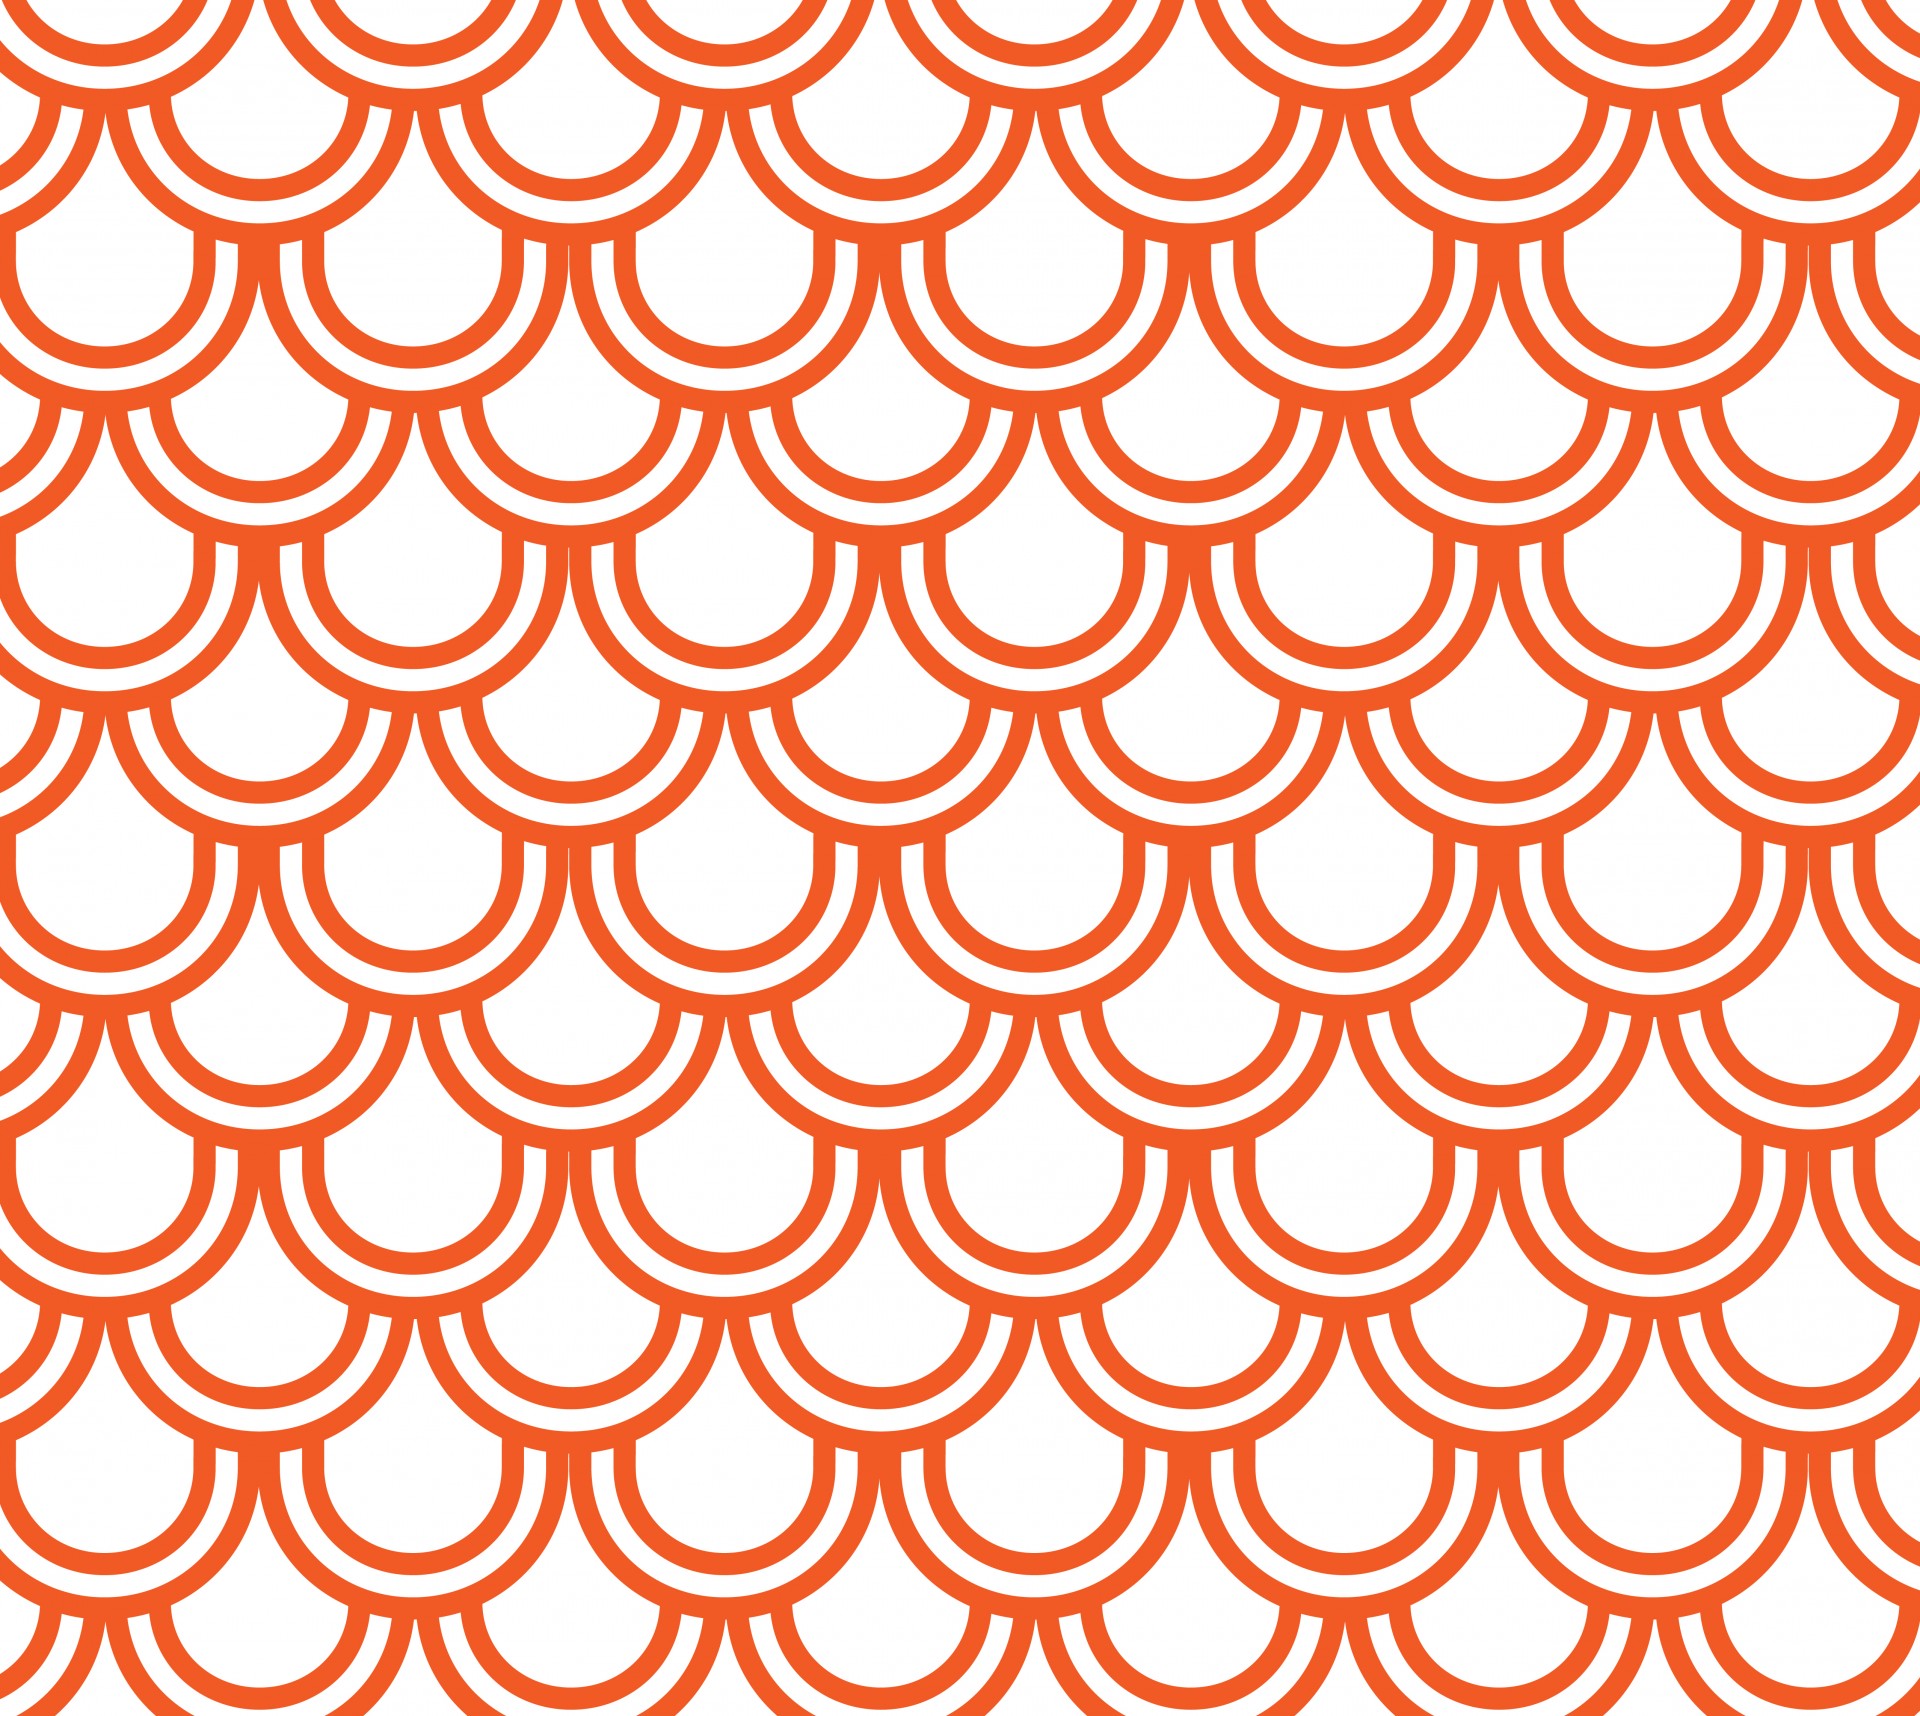 Fish scales,scales,orange,wallpaper,background - free image from